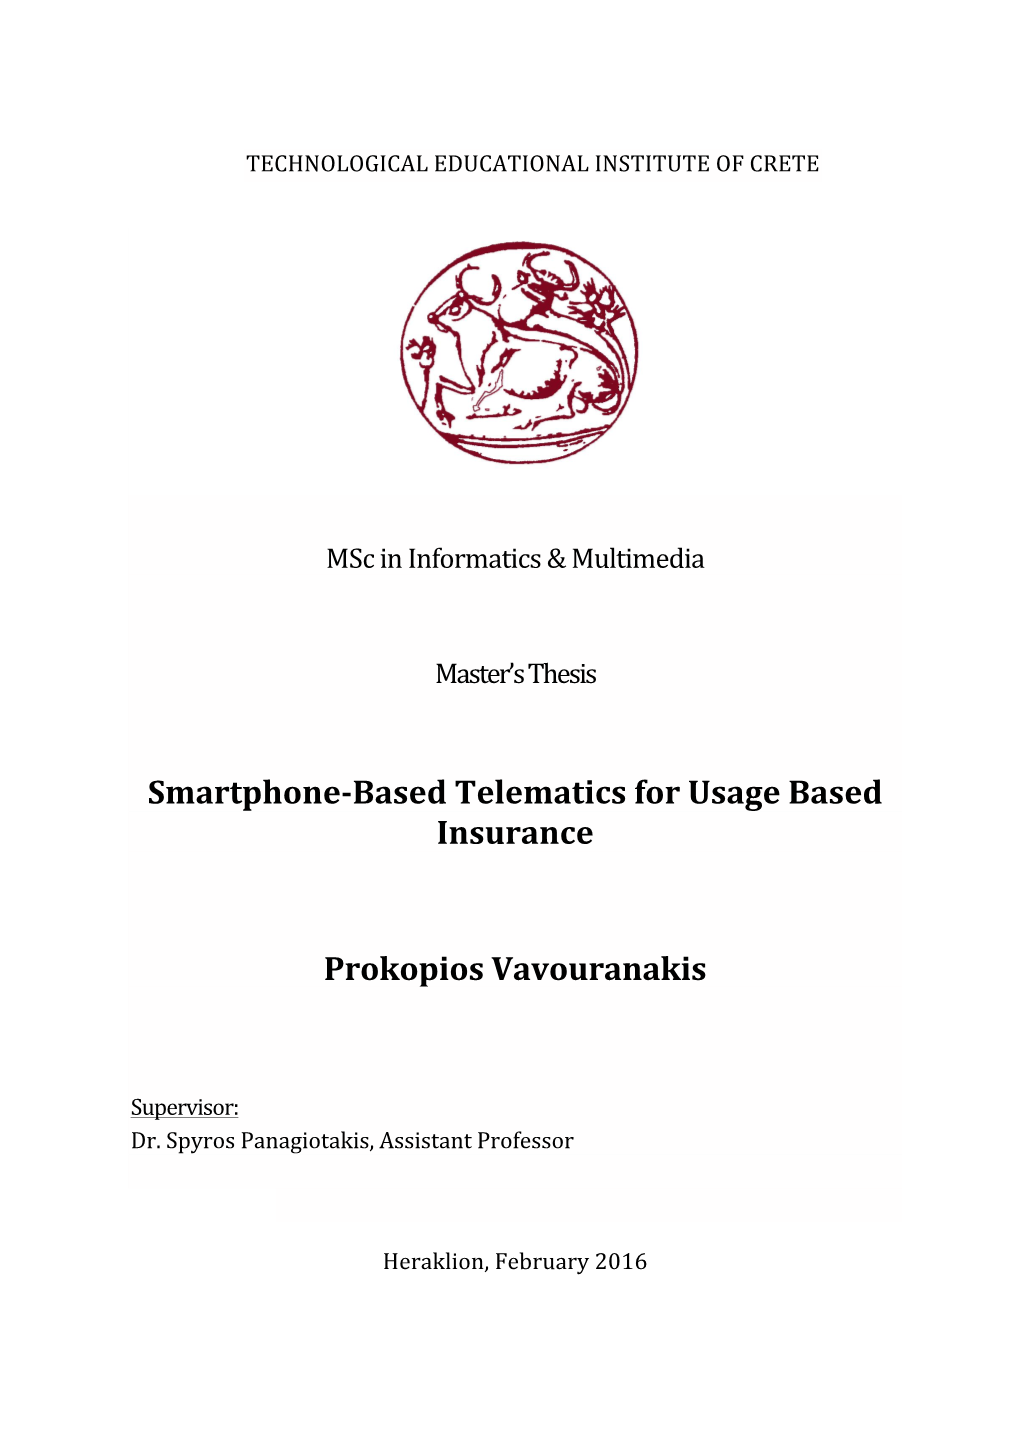 Smartphone-Based Telematics for Usage Based Insurance Prokopios